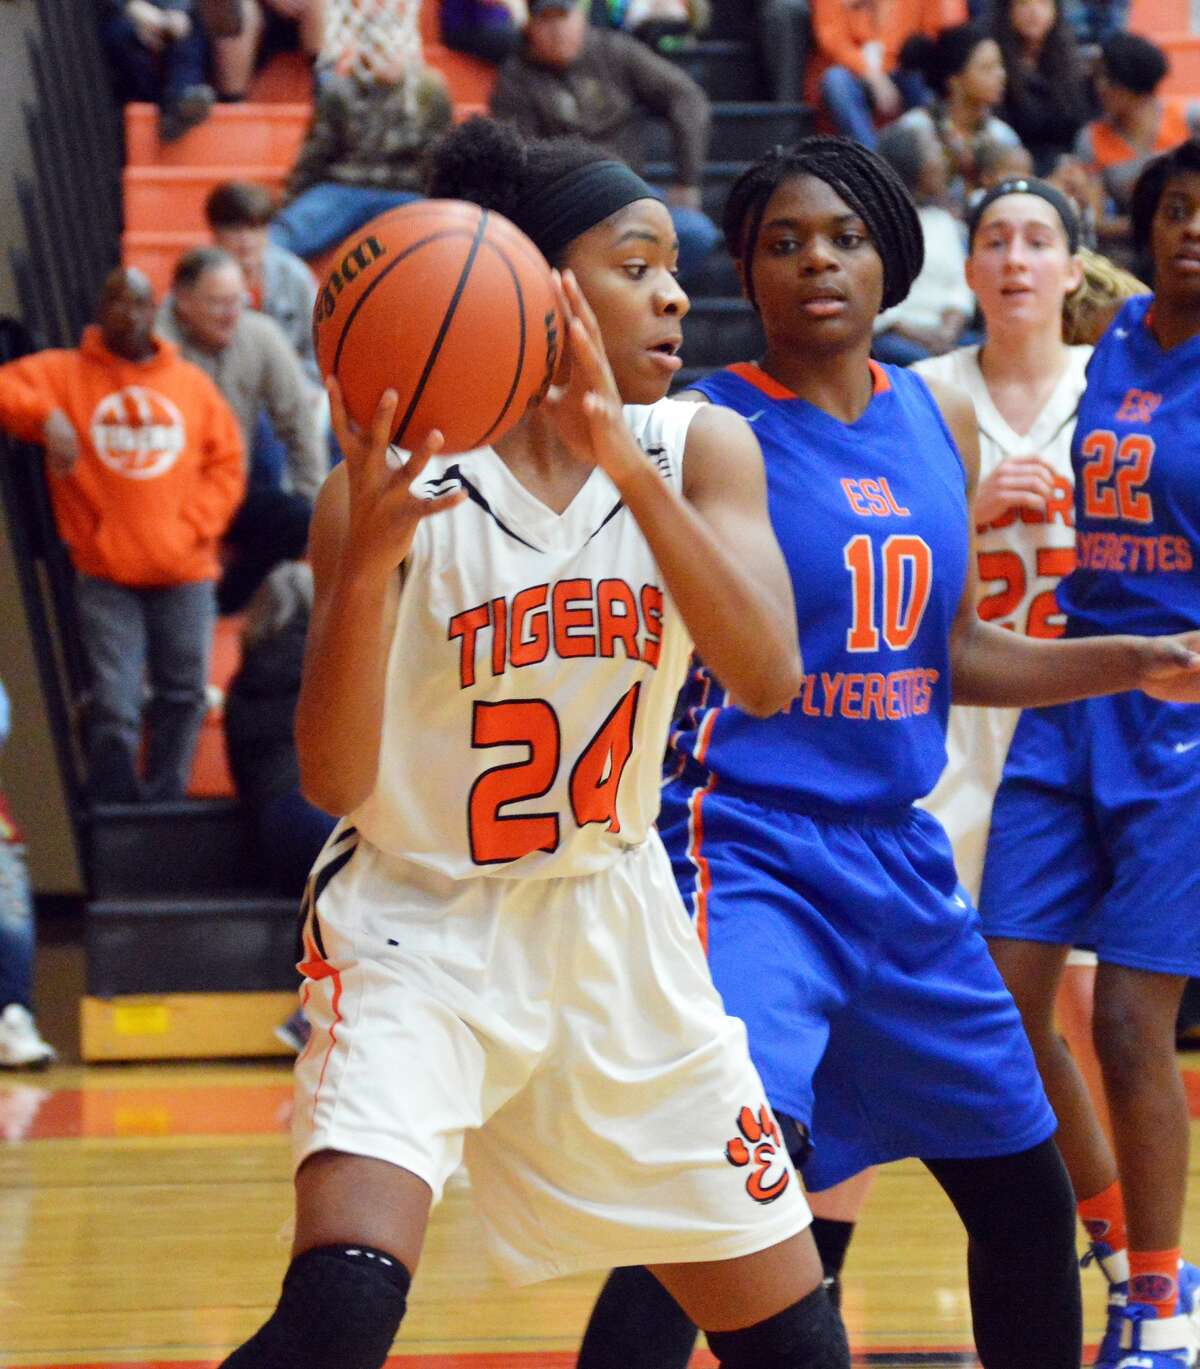 Edwardsville junior Myriah Noodel-Haywood, left, collects a pass underneath the basket during third-quarter action against East St. Louis on Thursday inside Lucco-Jackson Gymnasium.